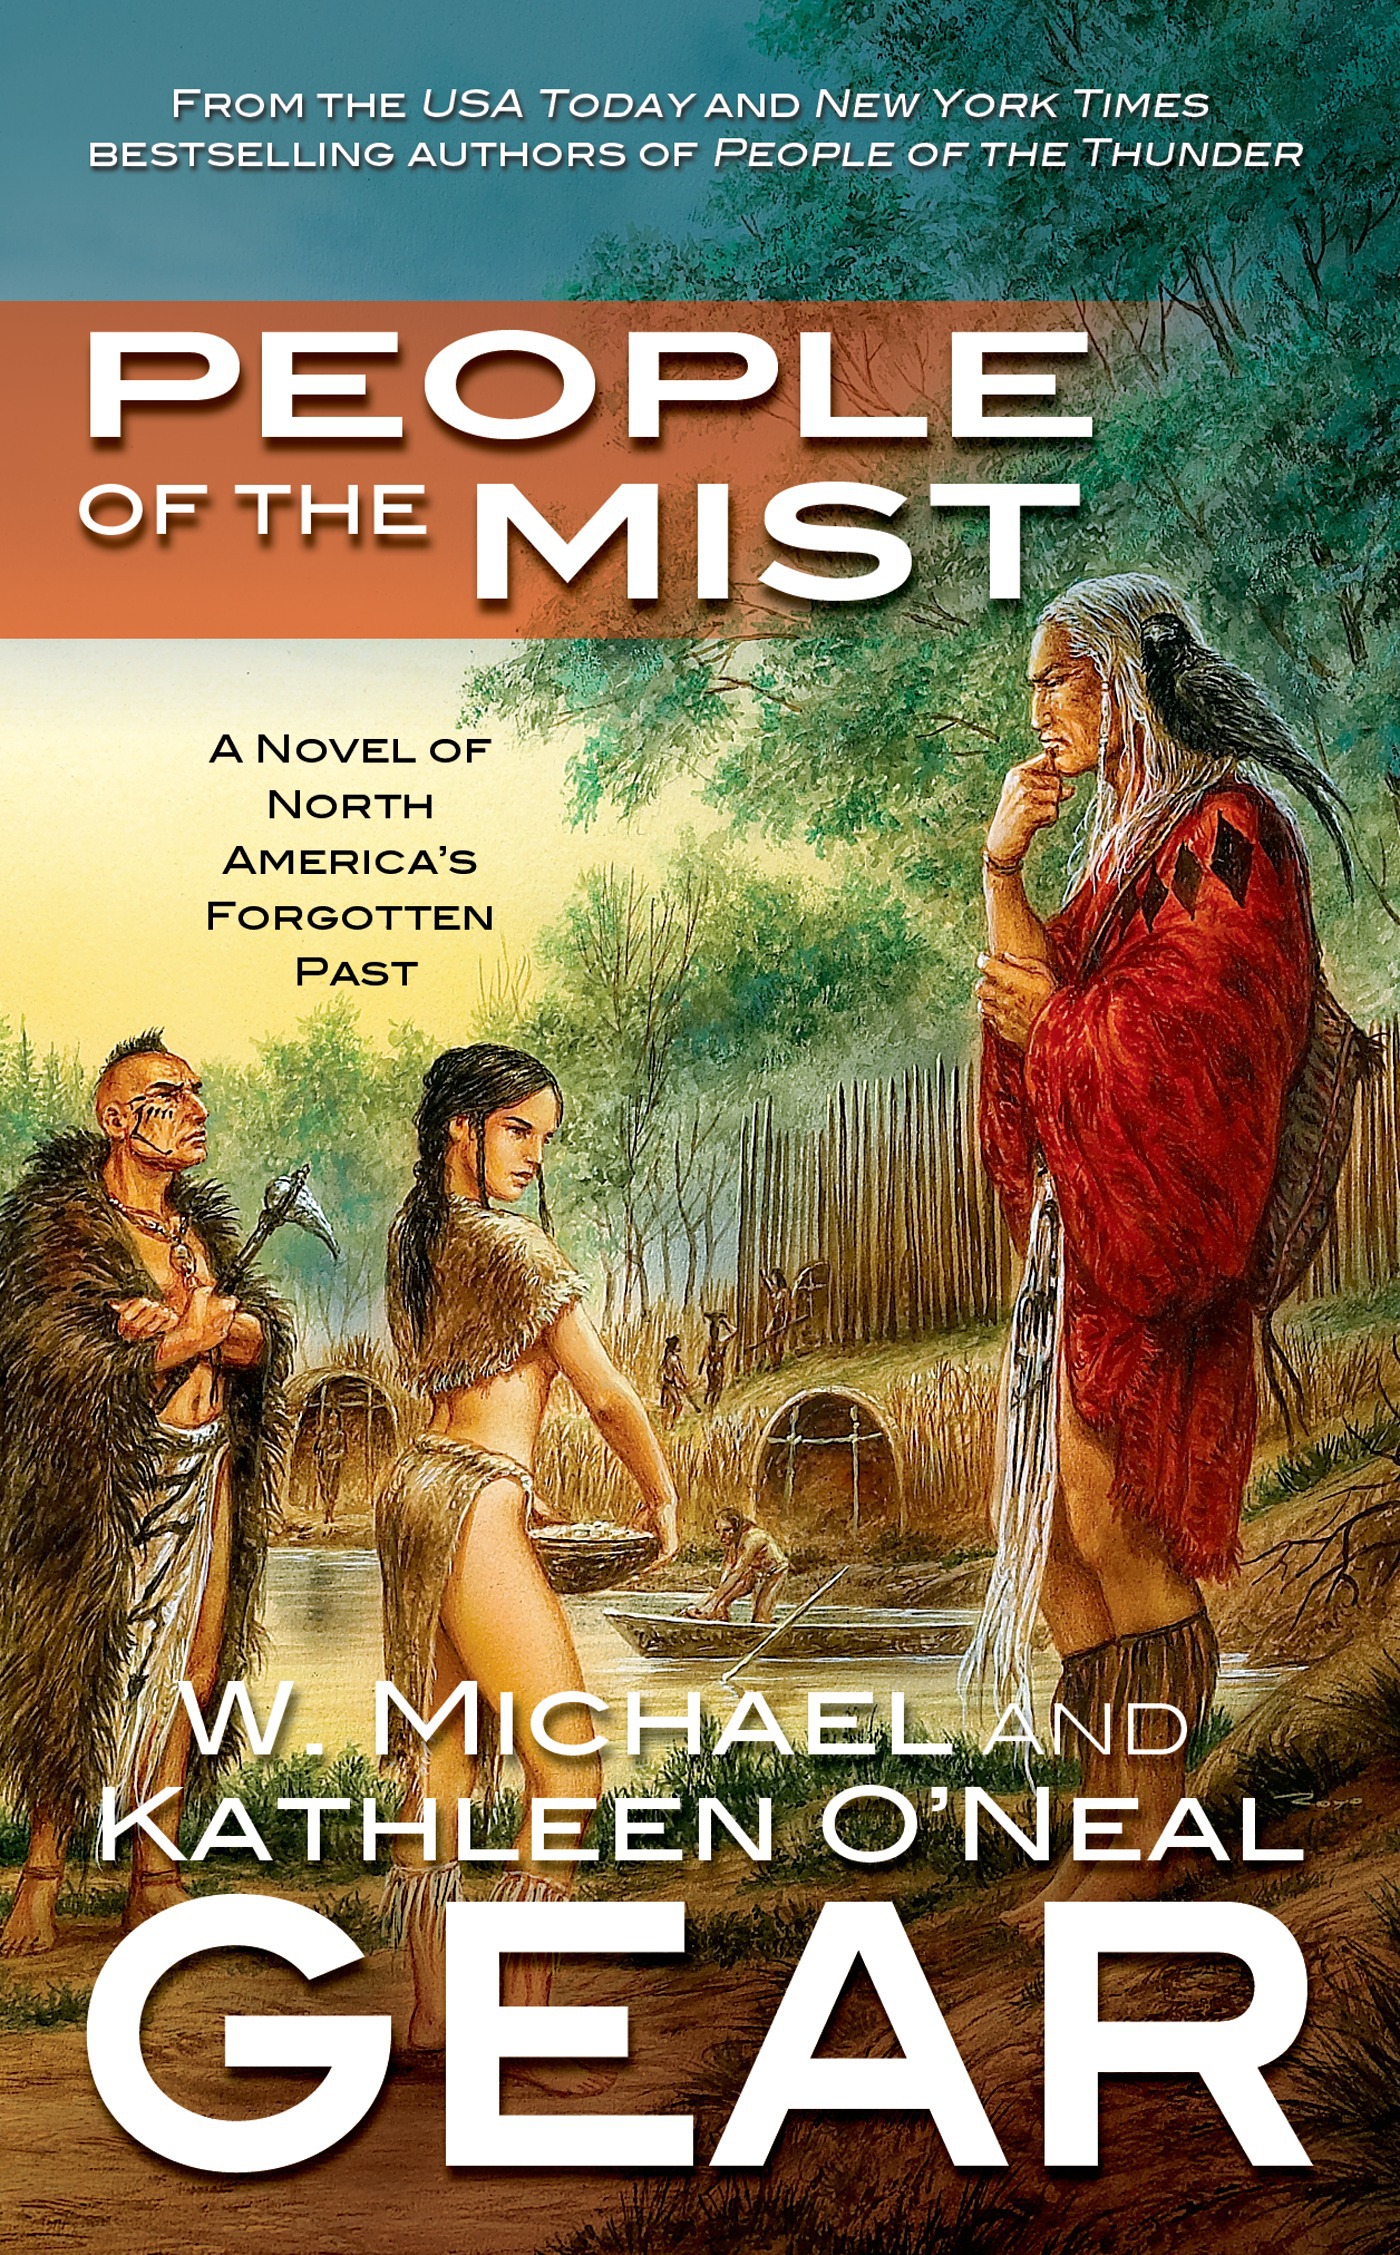 People of the Mist : A Novel of North America's Forgotten Past by Kathleen O'Neal Gear, W. Michael Gear